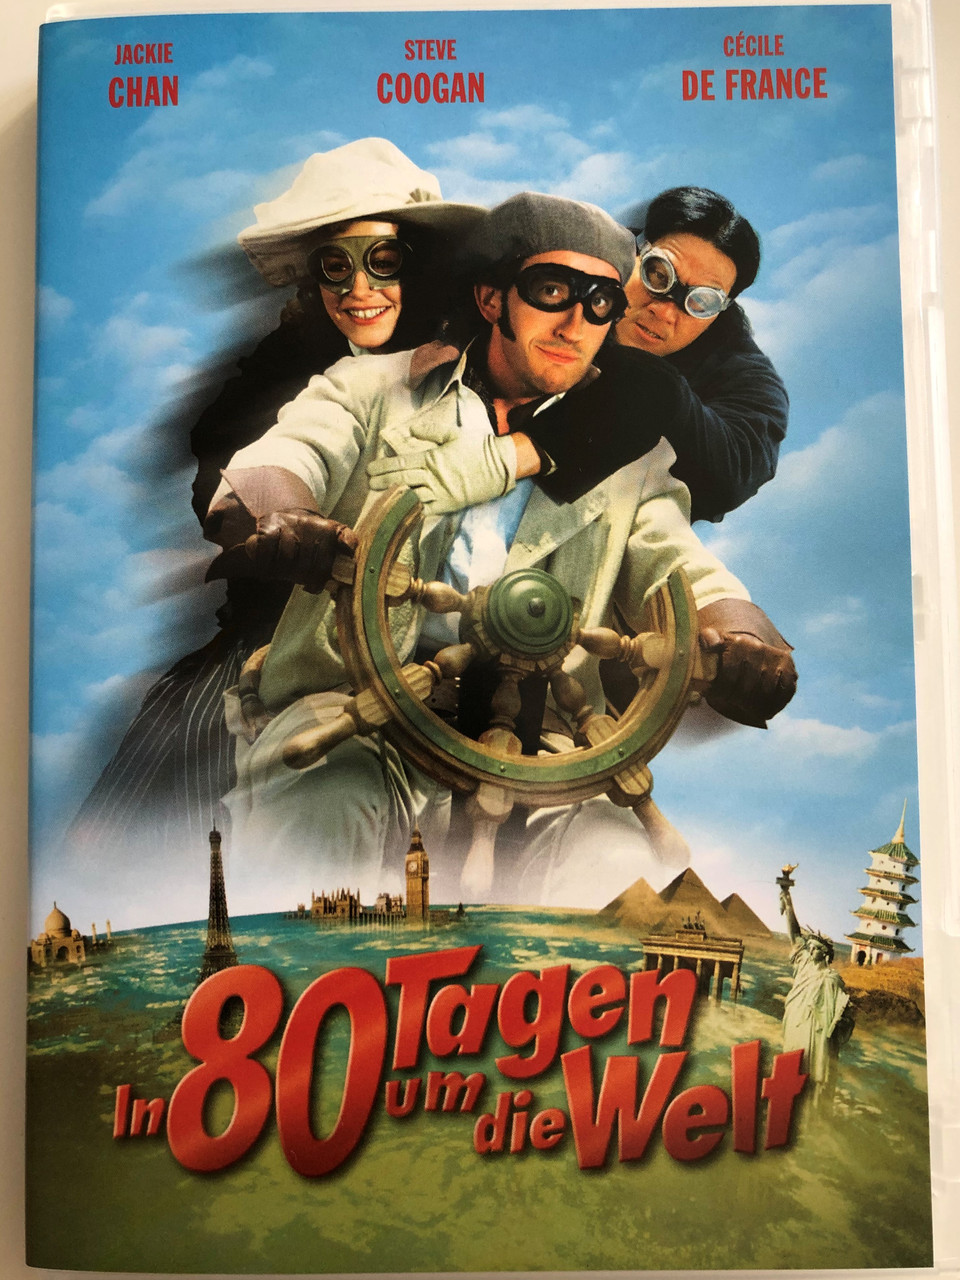 Around the World in 80 Days DVD 2004 In 80 Tagen um die Welt / Directed by  Frank Coraci / Starring: Jackie Chan, Steve Coogan, Cécile de France, Jim  Broadbent, Kathy Bates,